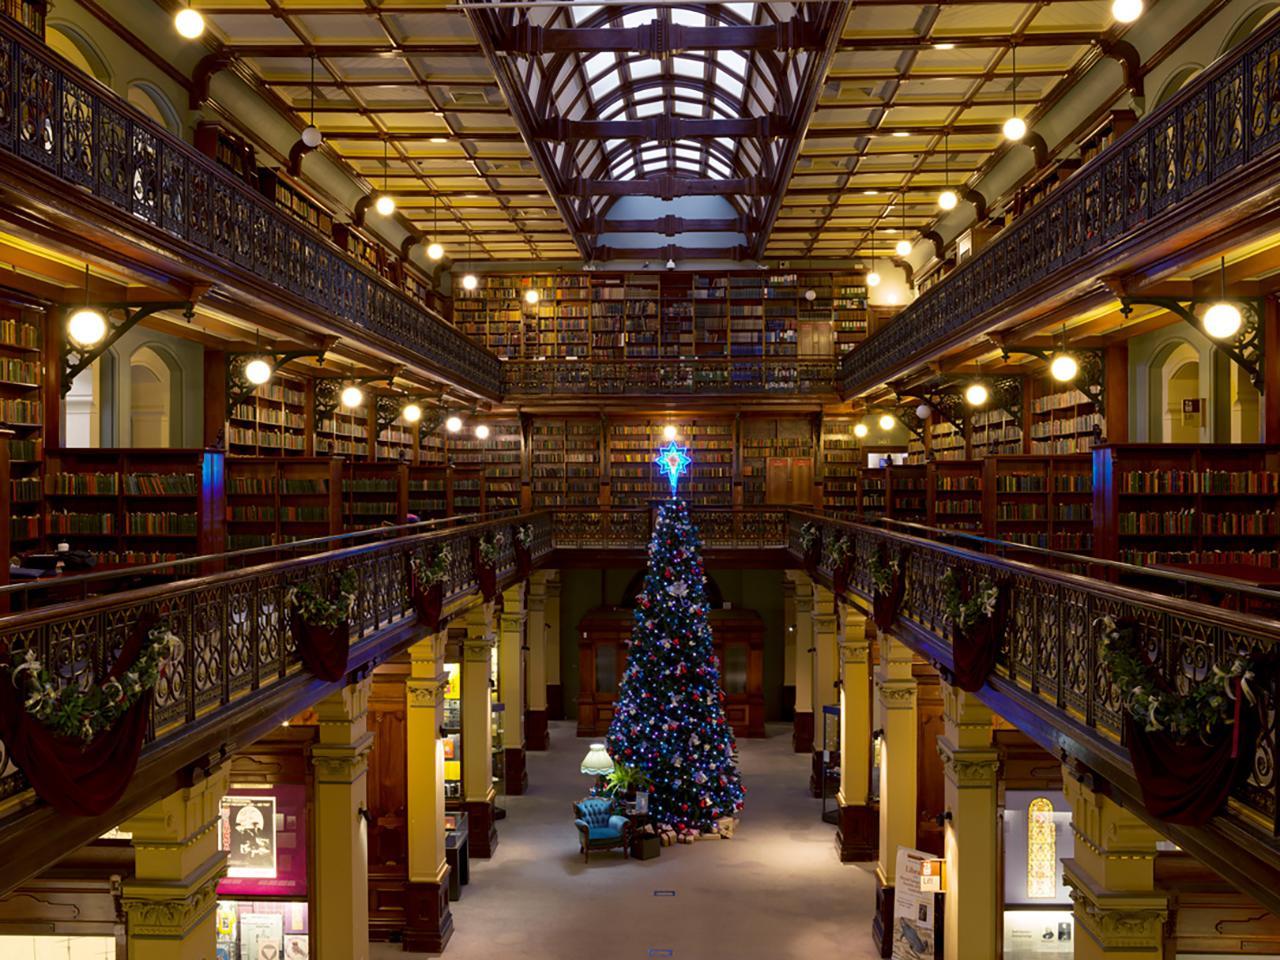 Large Christmas tree in the Mortlock Chamber